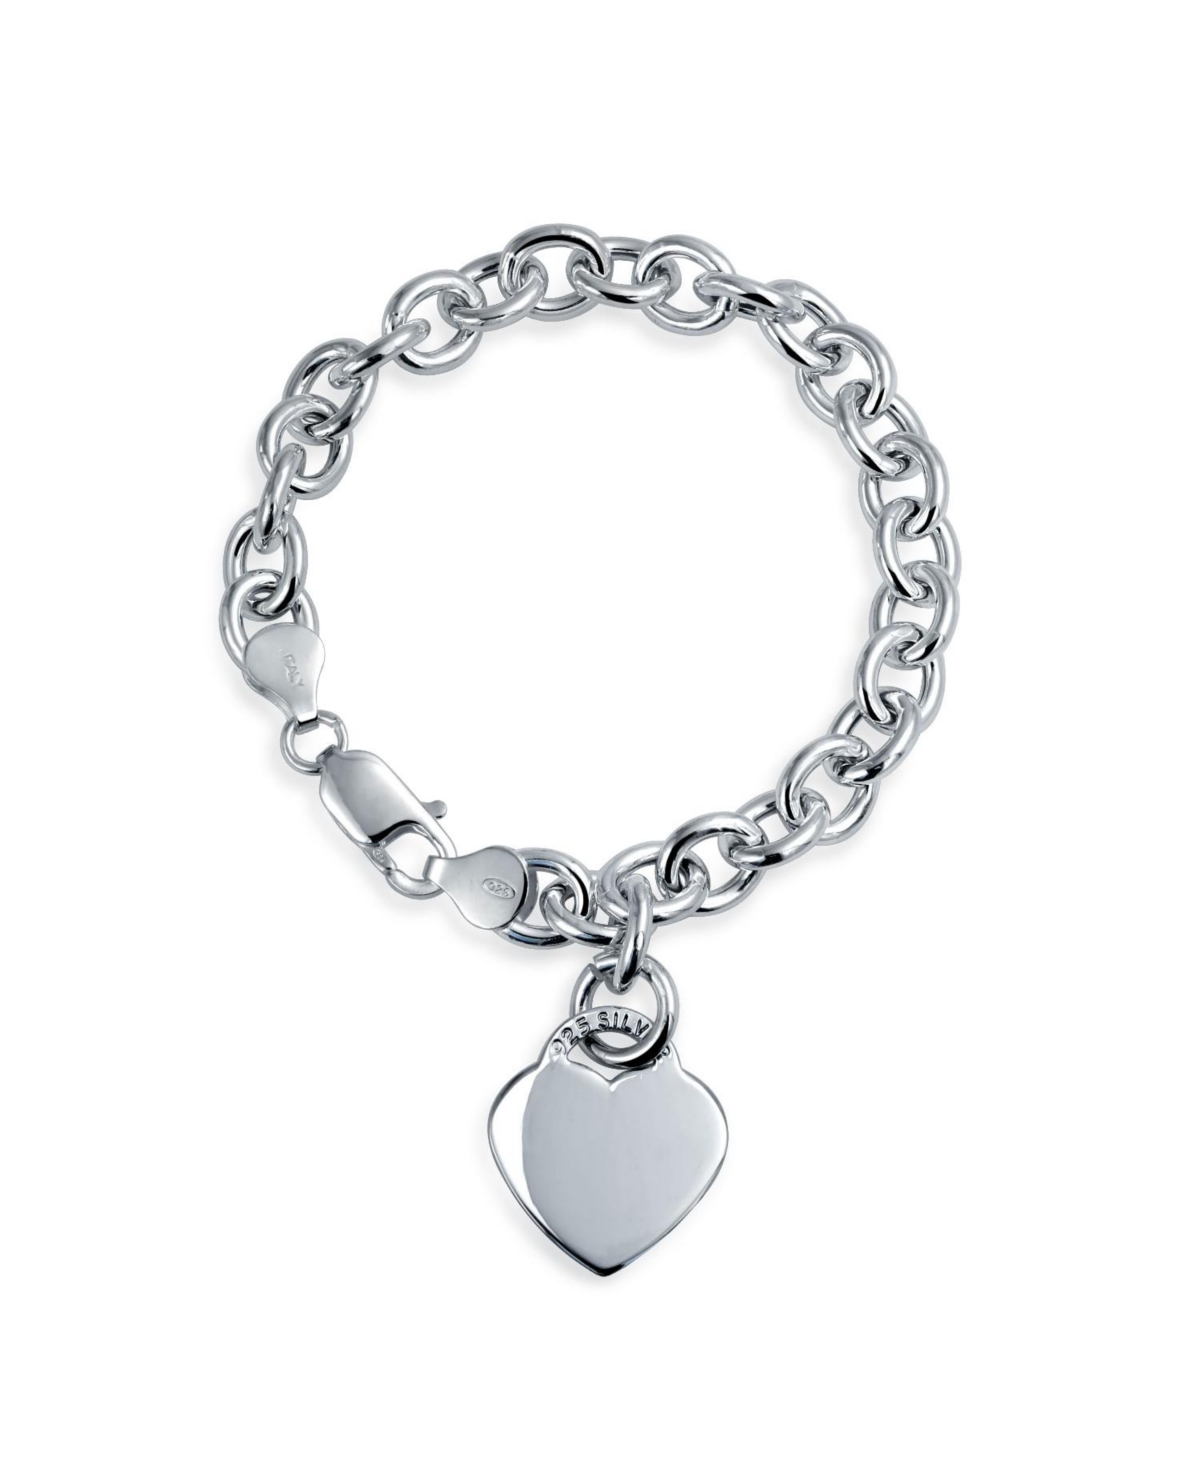 Bling Jewelry Solid Link Heart Shape Tag Charm Bracelet 7.5 Inch For Women  Teens .925 Sterling Silver Made in Italy - Silver | Smart Closet